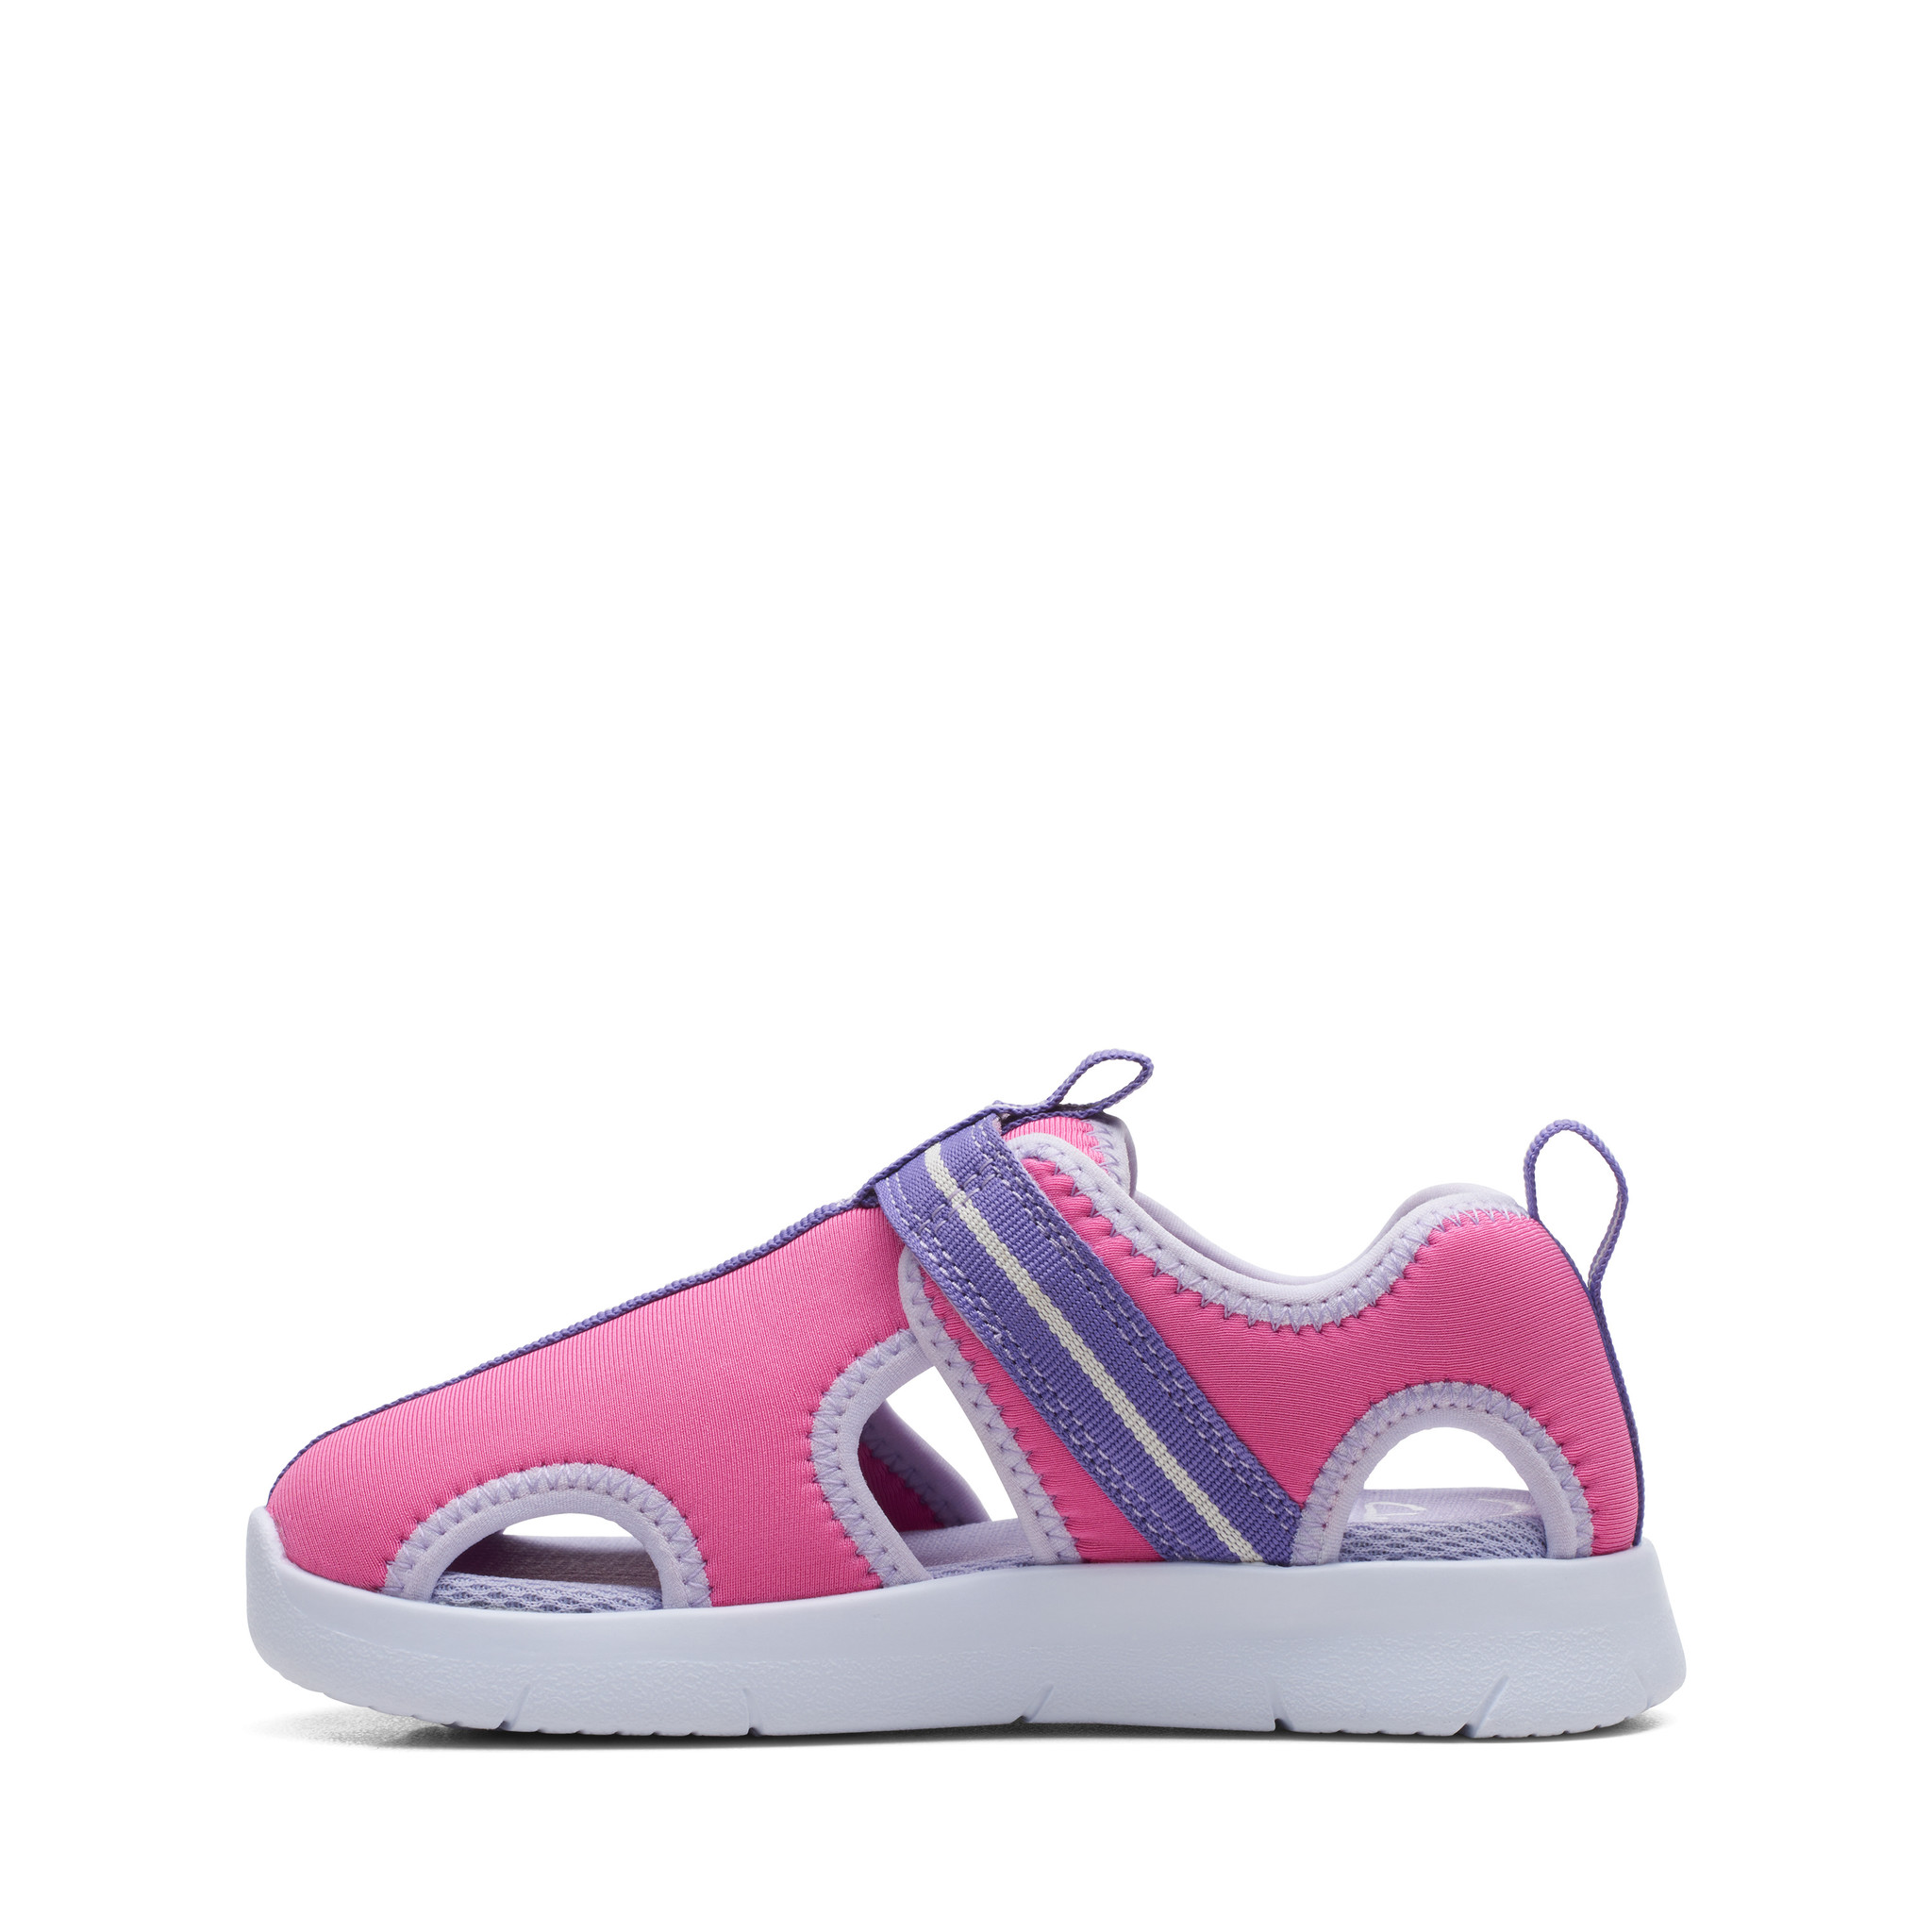 Clarks Ath Water Pink Synthetic Junior